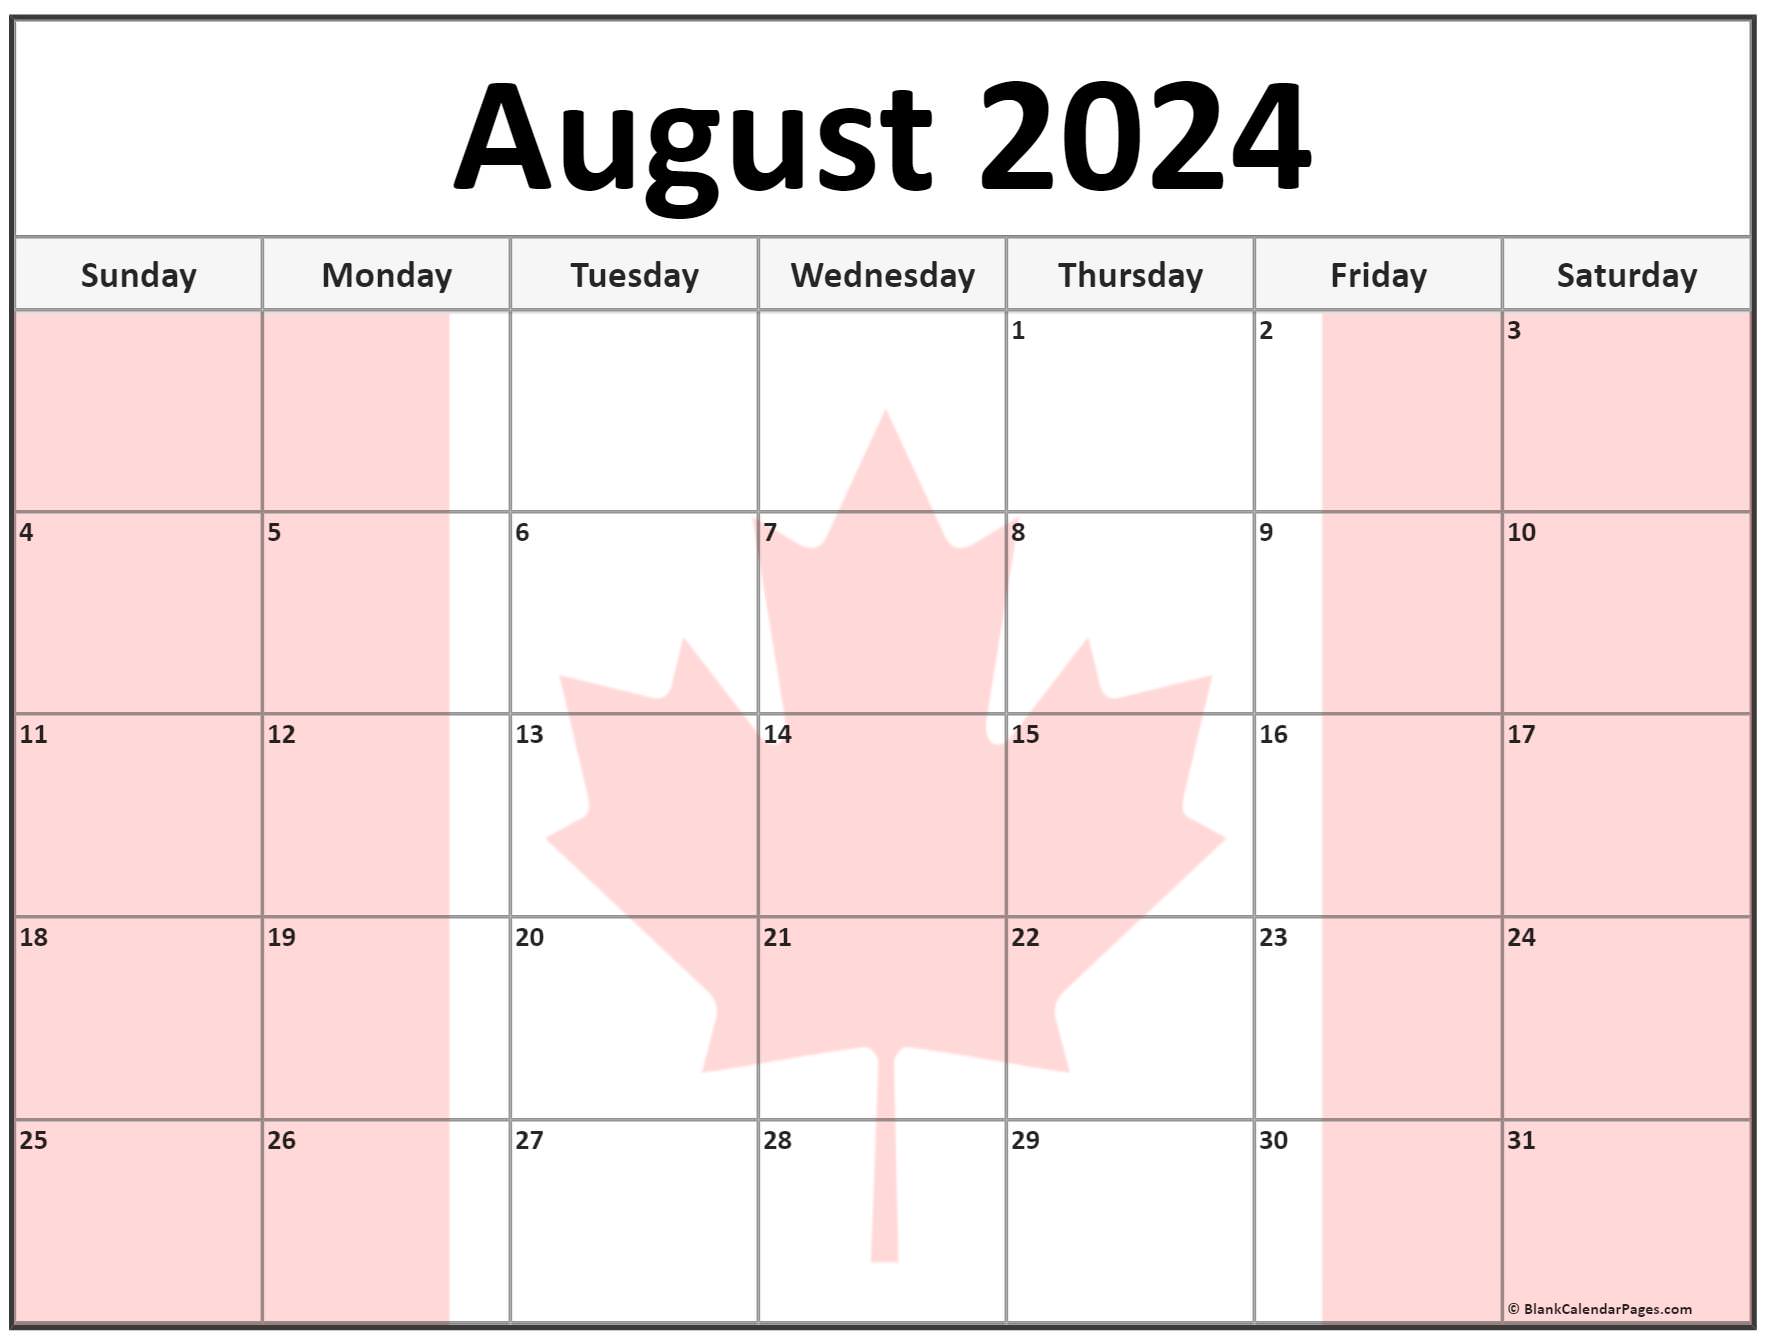 Collection Of August 2022 Photo Calendars With Image Filters 